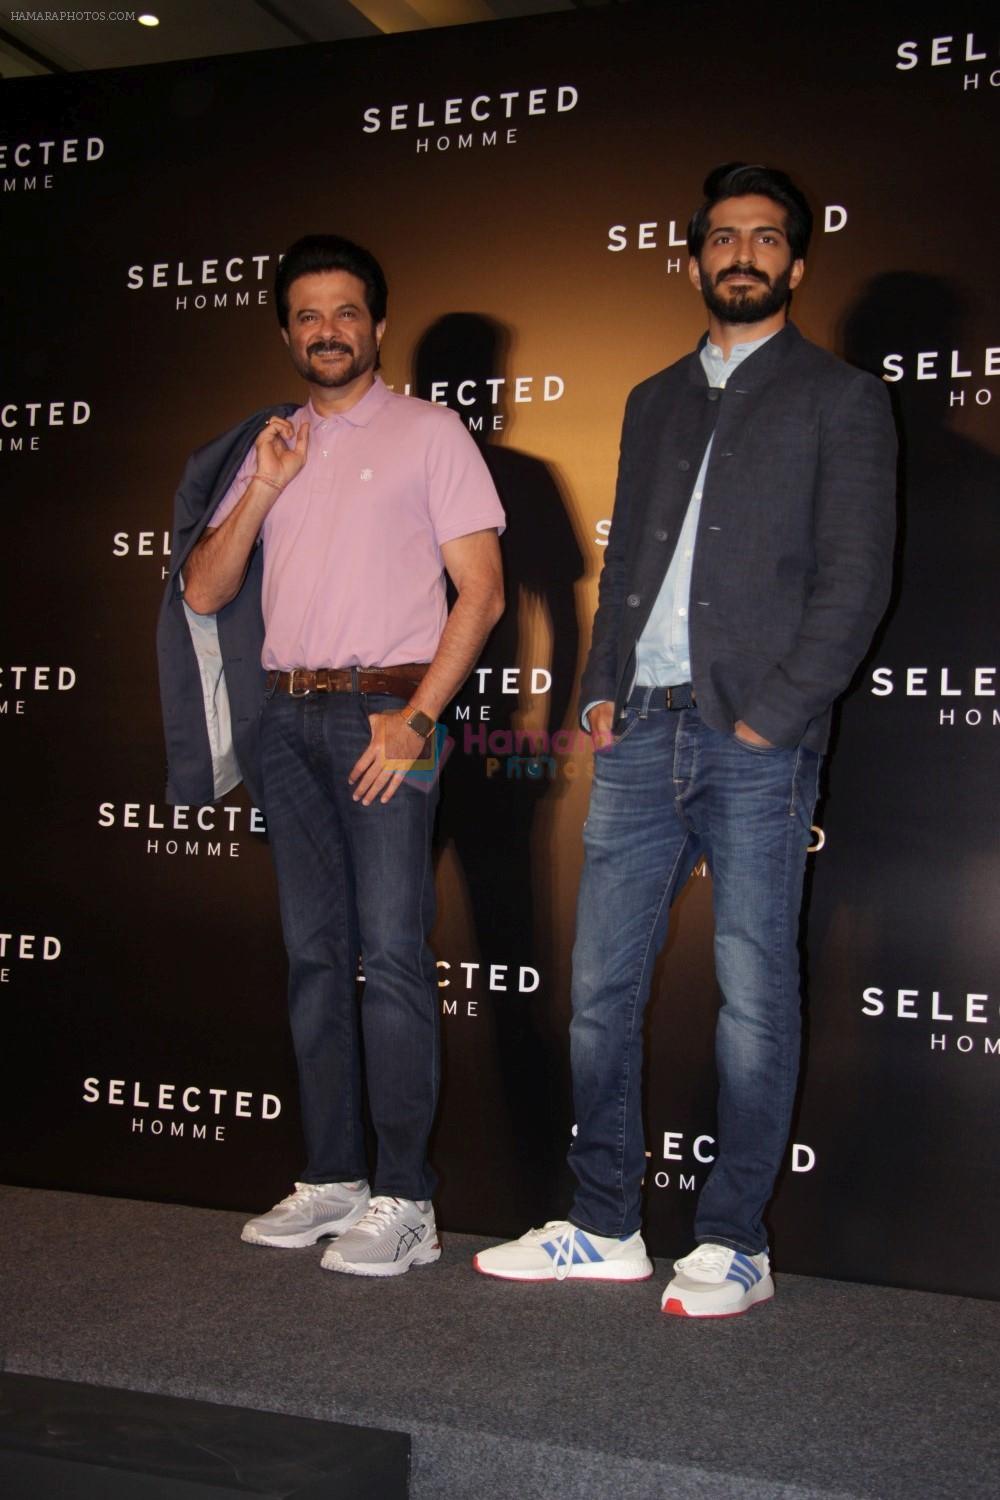 Anil Kapoor & Harshvardhan Kapoor are Launching Premium Menswear Collection on 5th May 2017